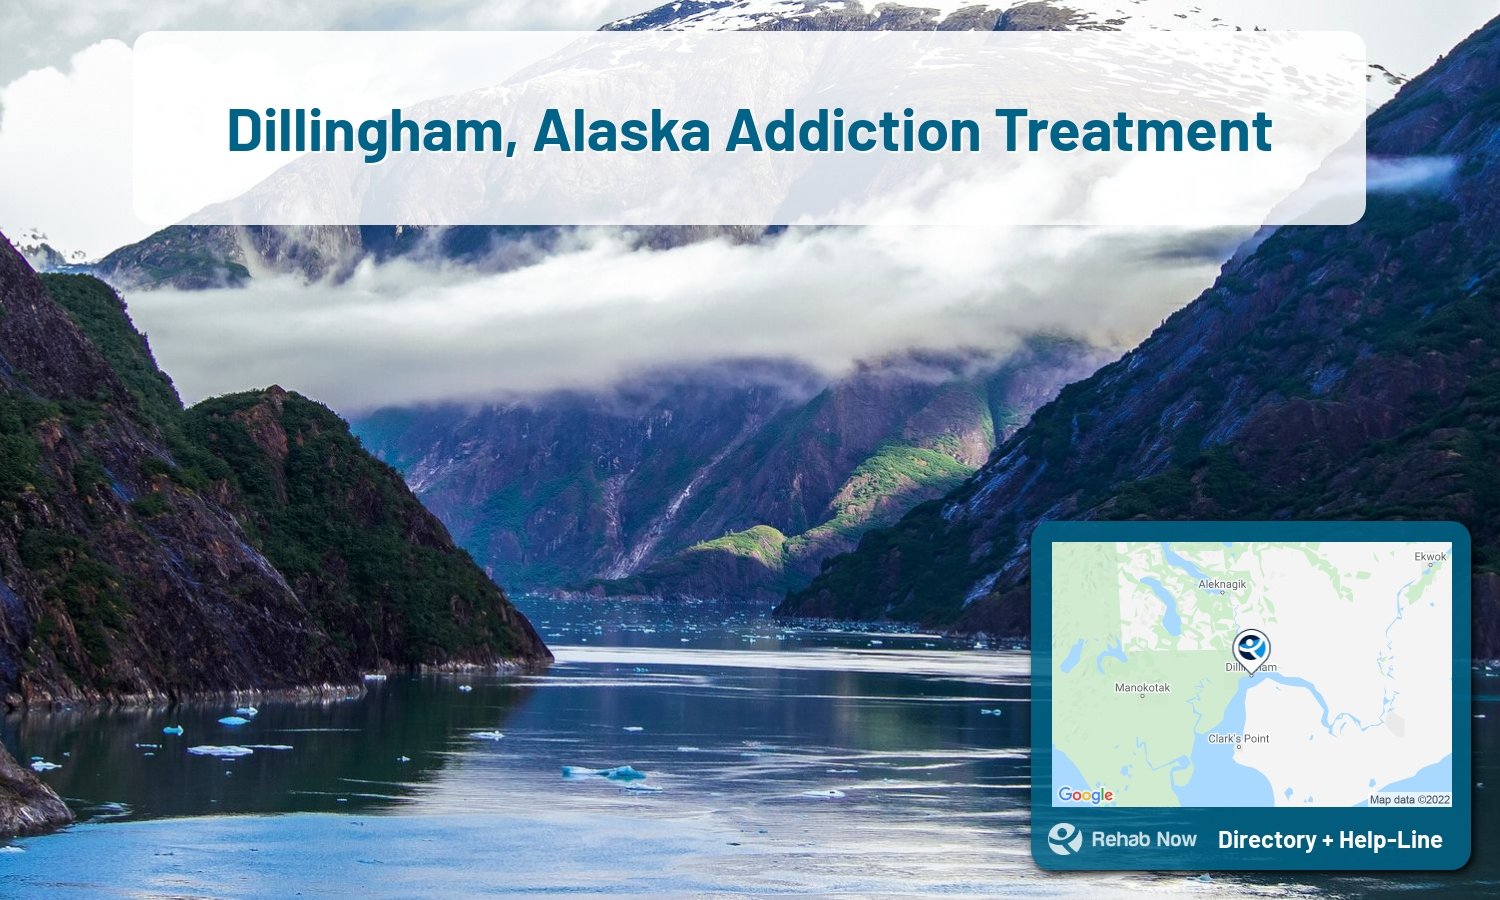 Dillingham, AK Treatment Centers. Find drug rehab in Dillingham, Alaska, or detox and treatment programs. Get the right help now!